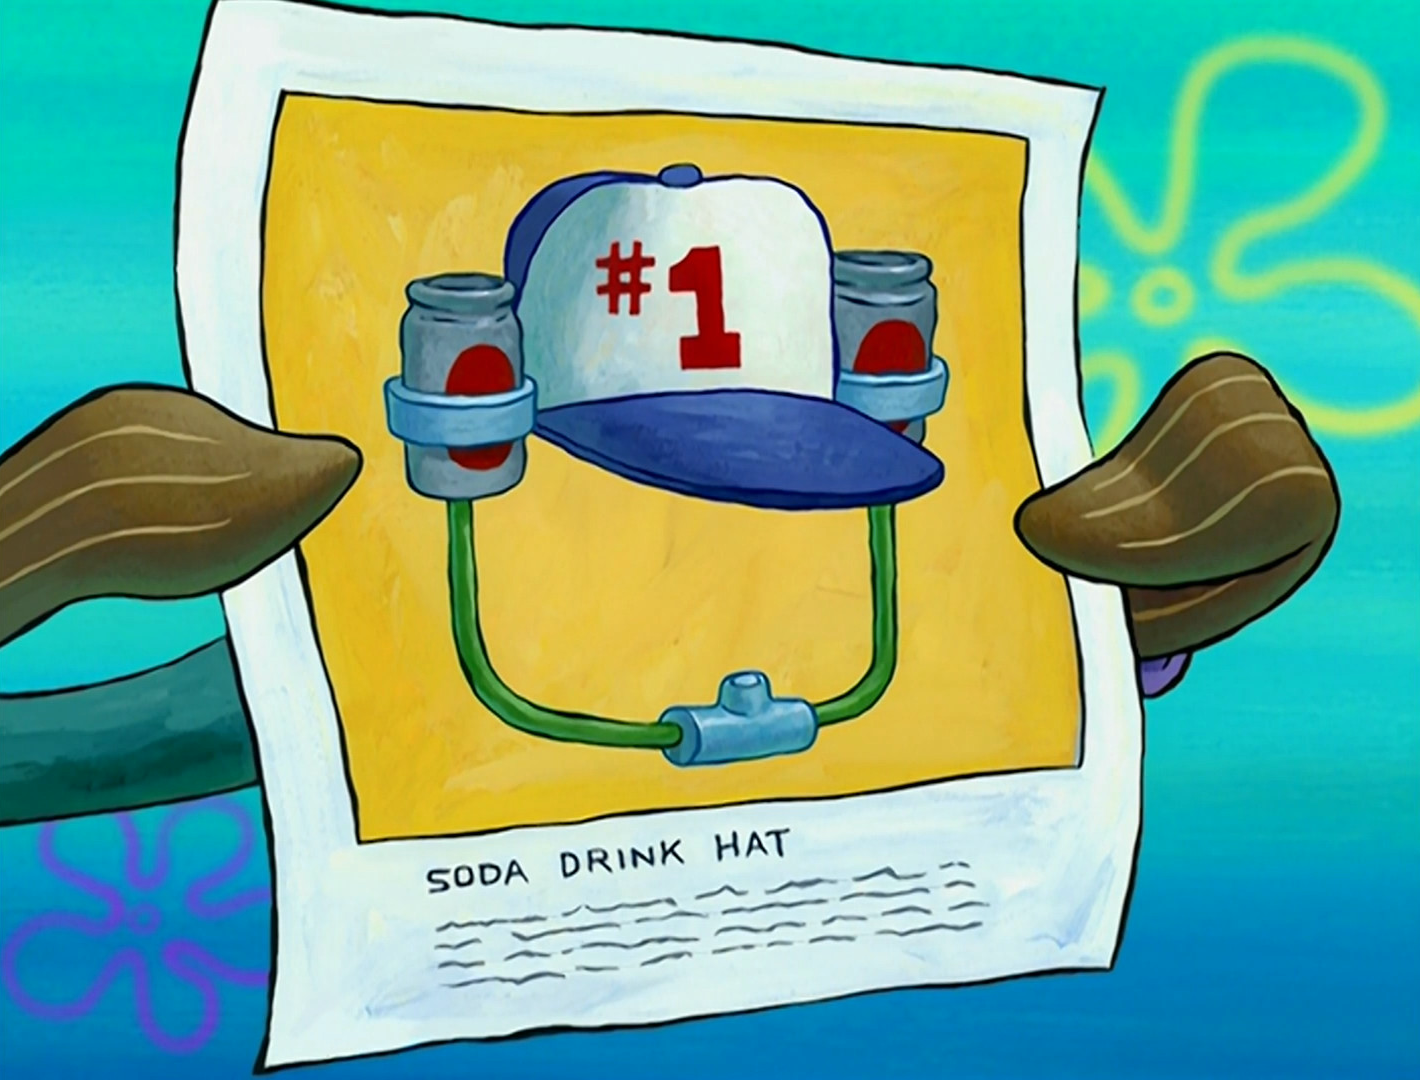 https://static.wikia.nocookie.net/spongebob/images/2/24/One_Krabs_Trash_053.png/revision/latest?cb=20200807001801